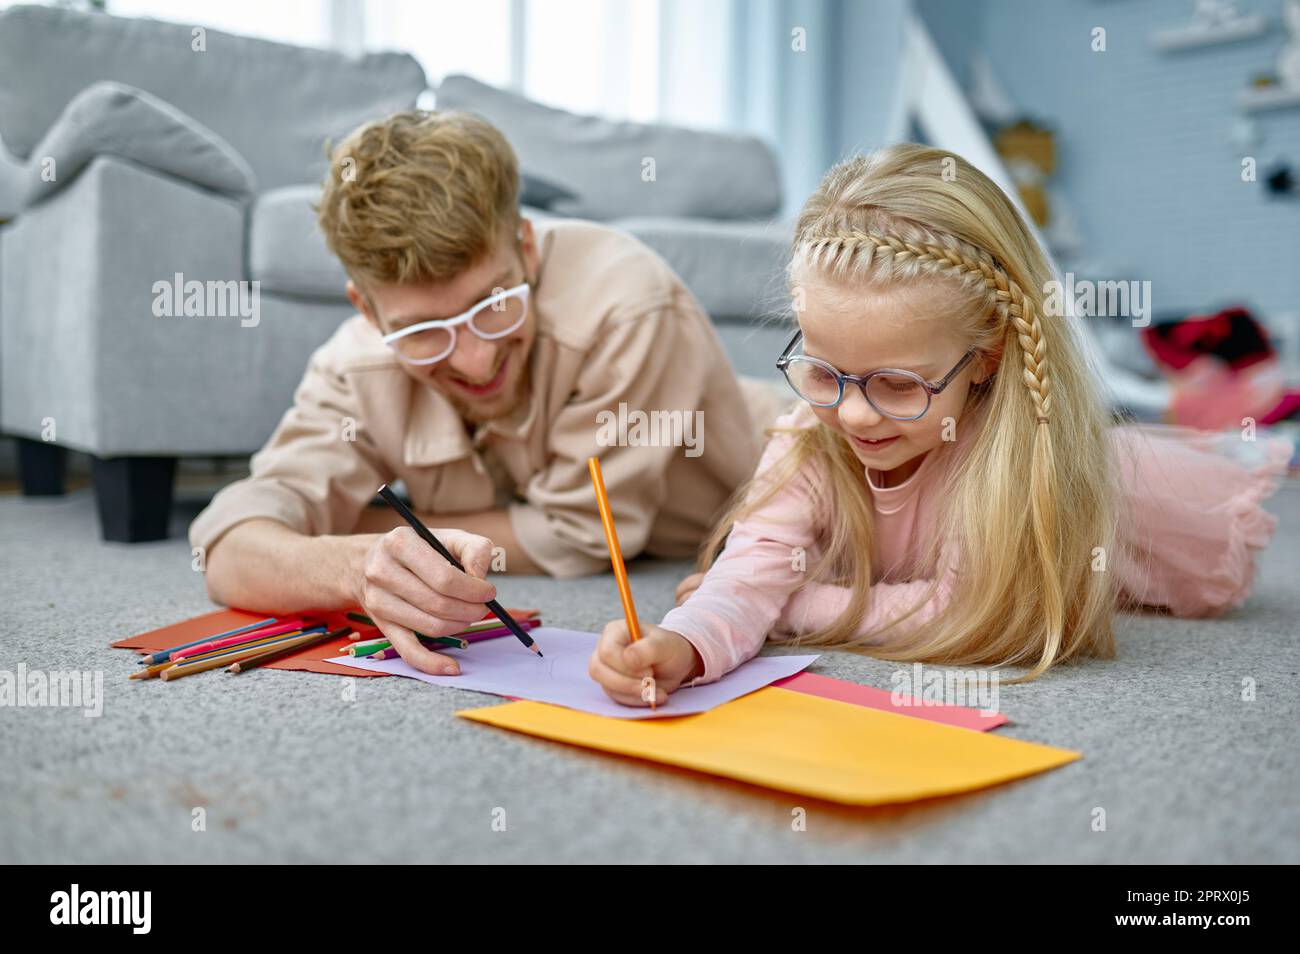 Father and daughter drawing on floor Stock Photo